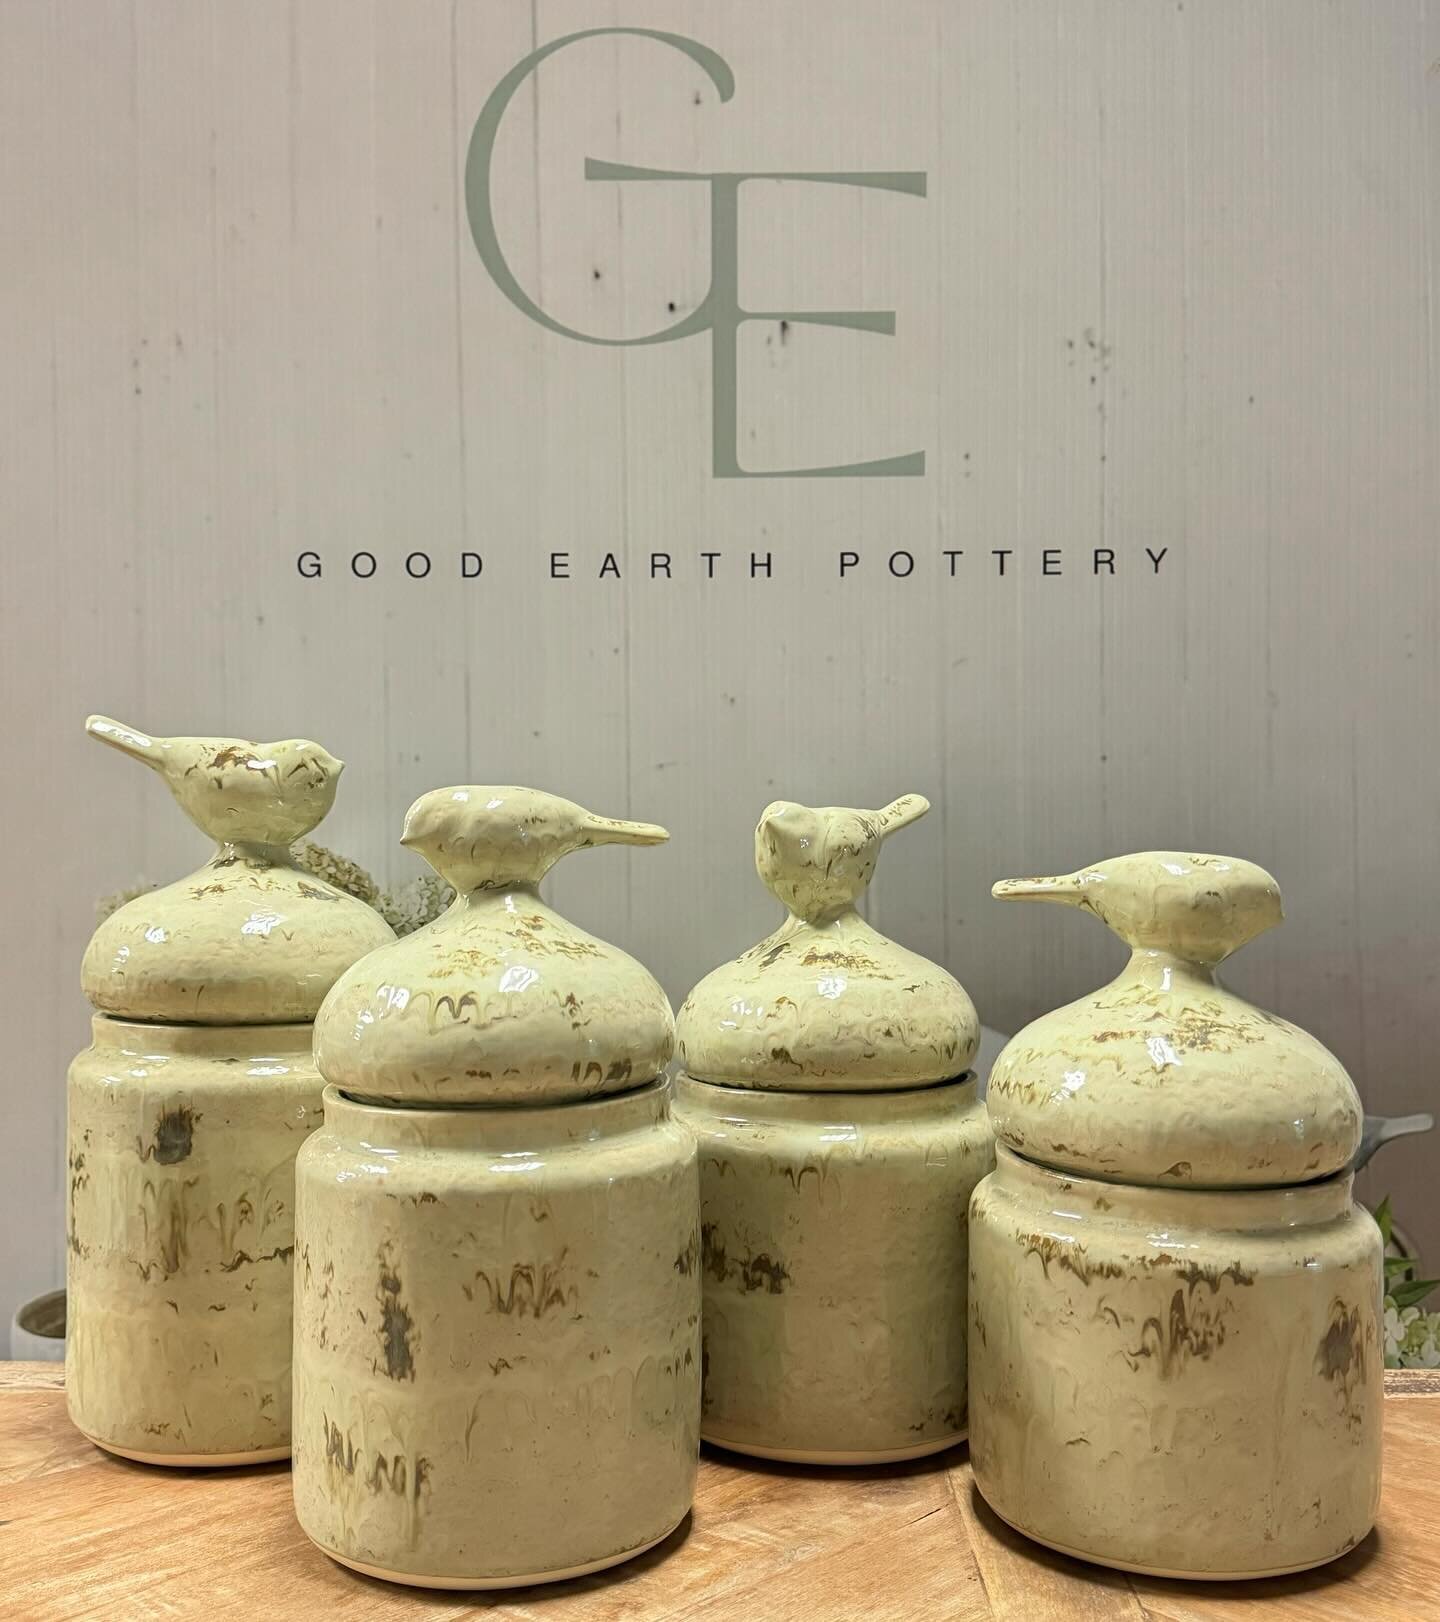 Our canister set with birds in pattern ✨CELERY✨

#thegoodearthpottery #goodearthpottery #goodearth #pottery #celery #madeinmississippi